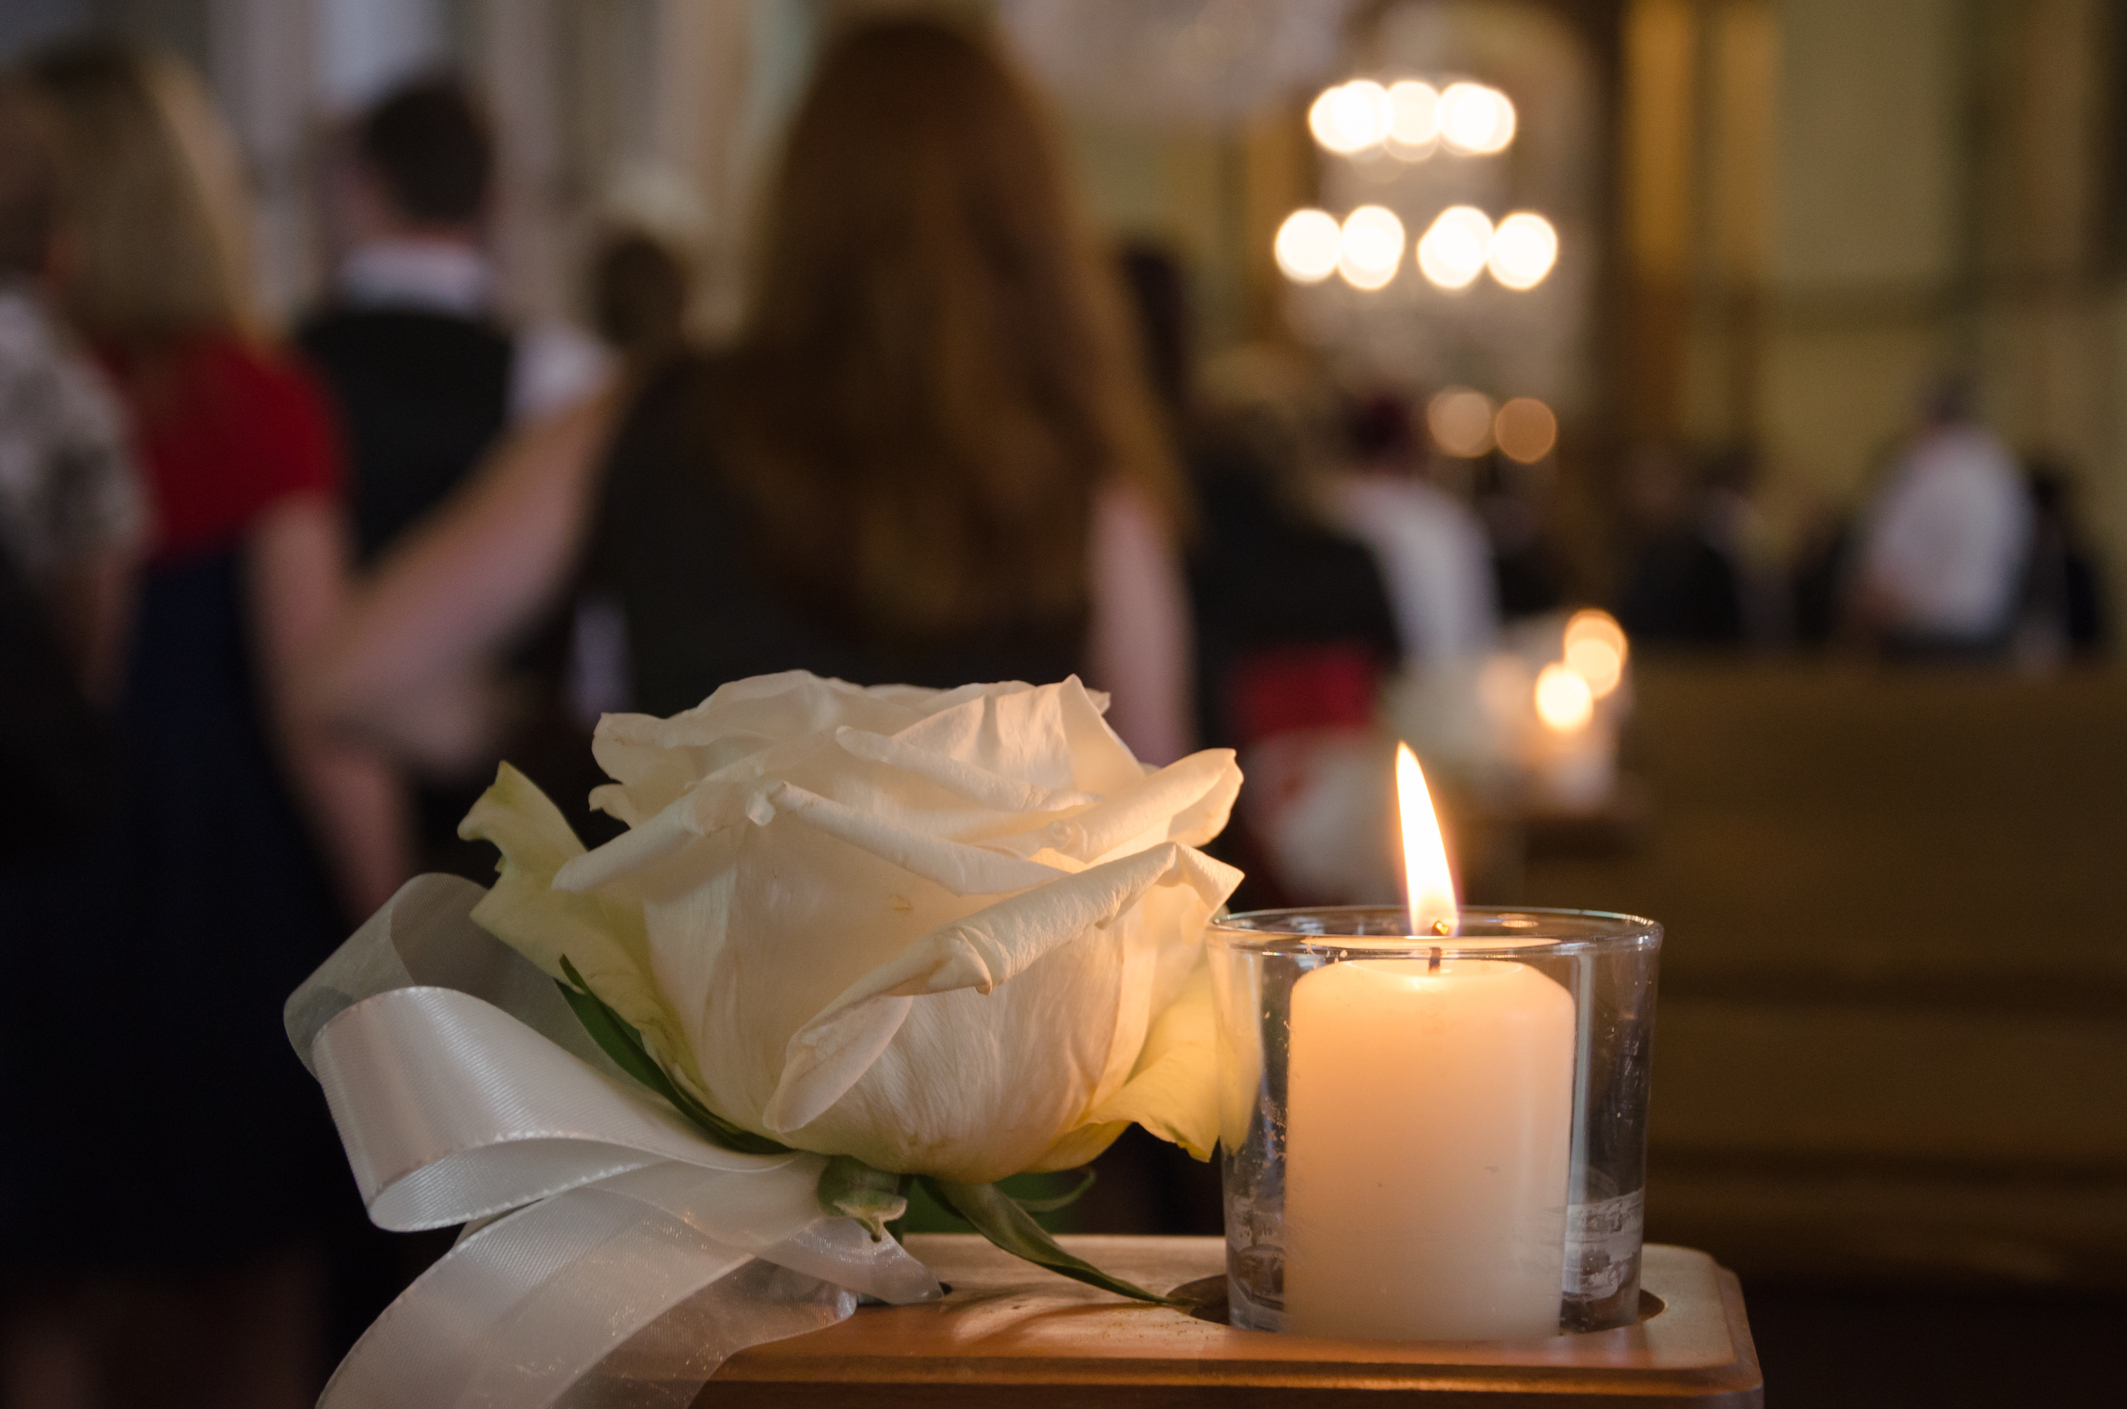 Blog funeral - Complete Guide to Planning a Funeral